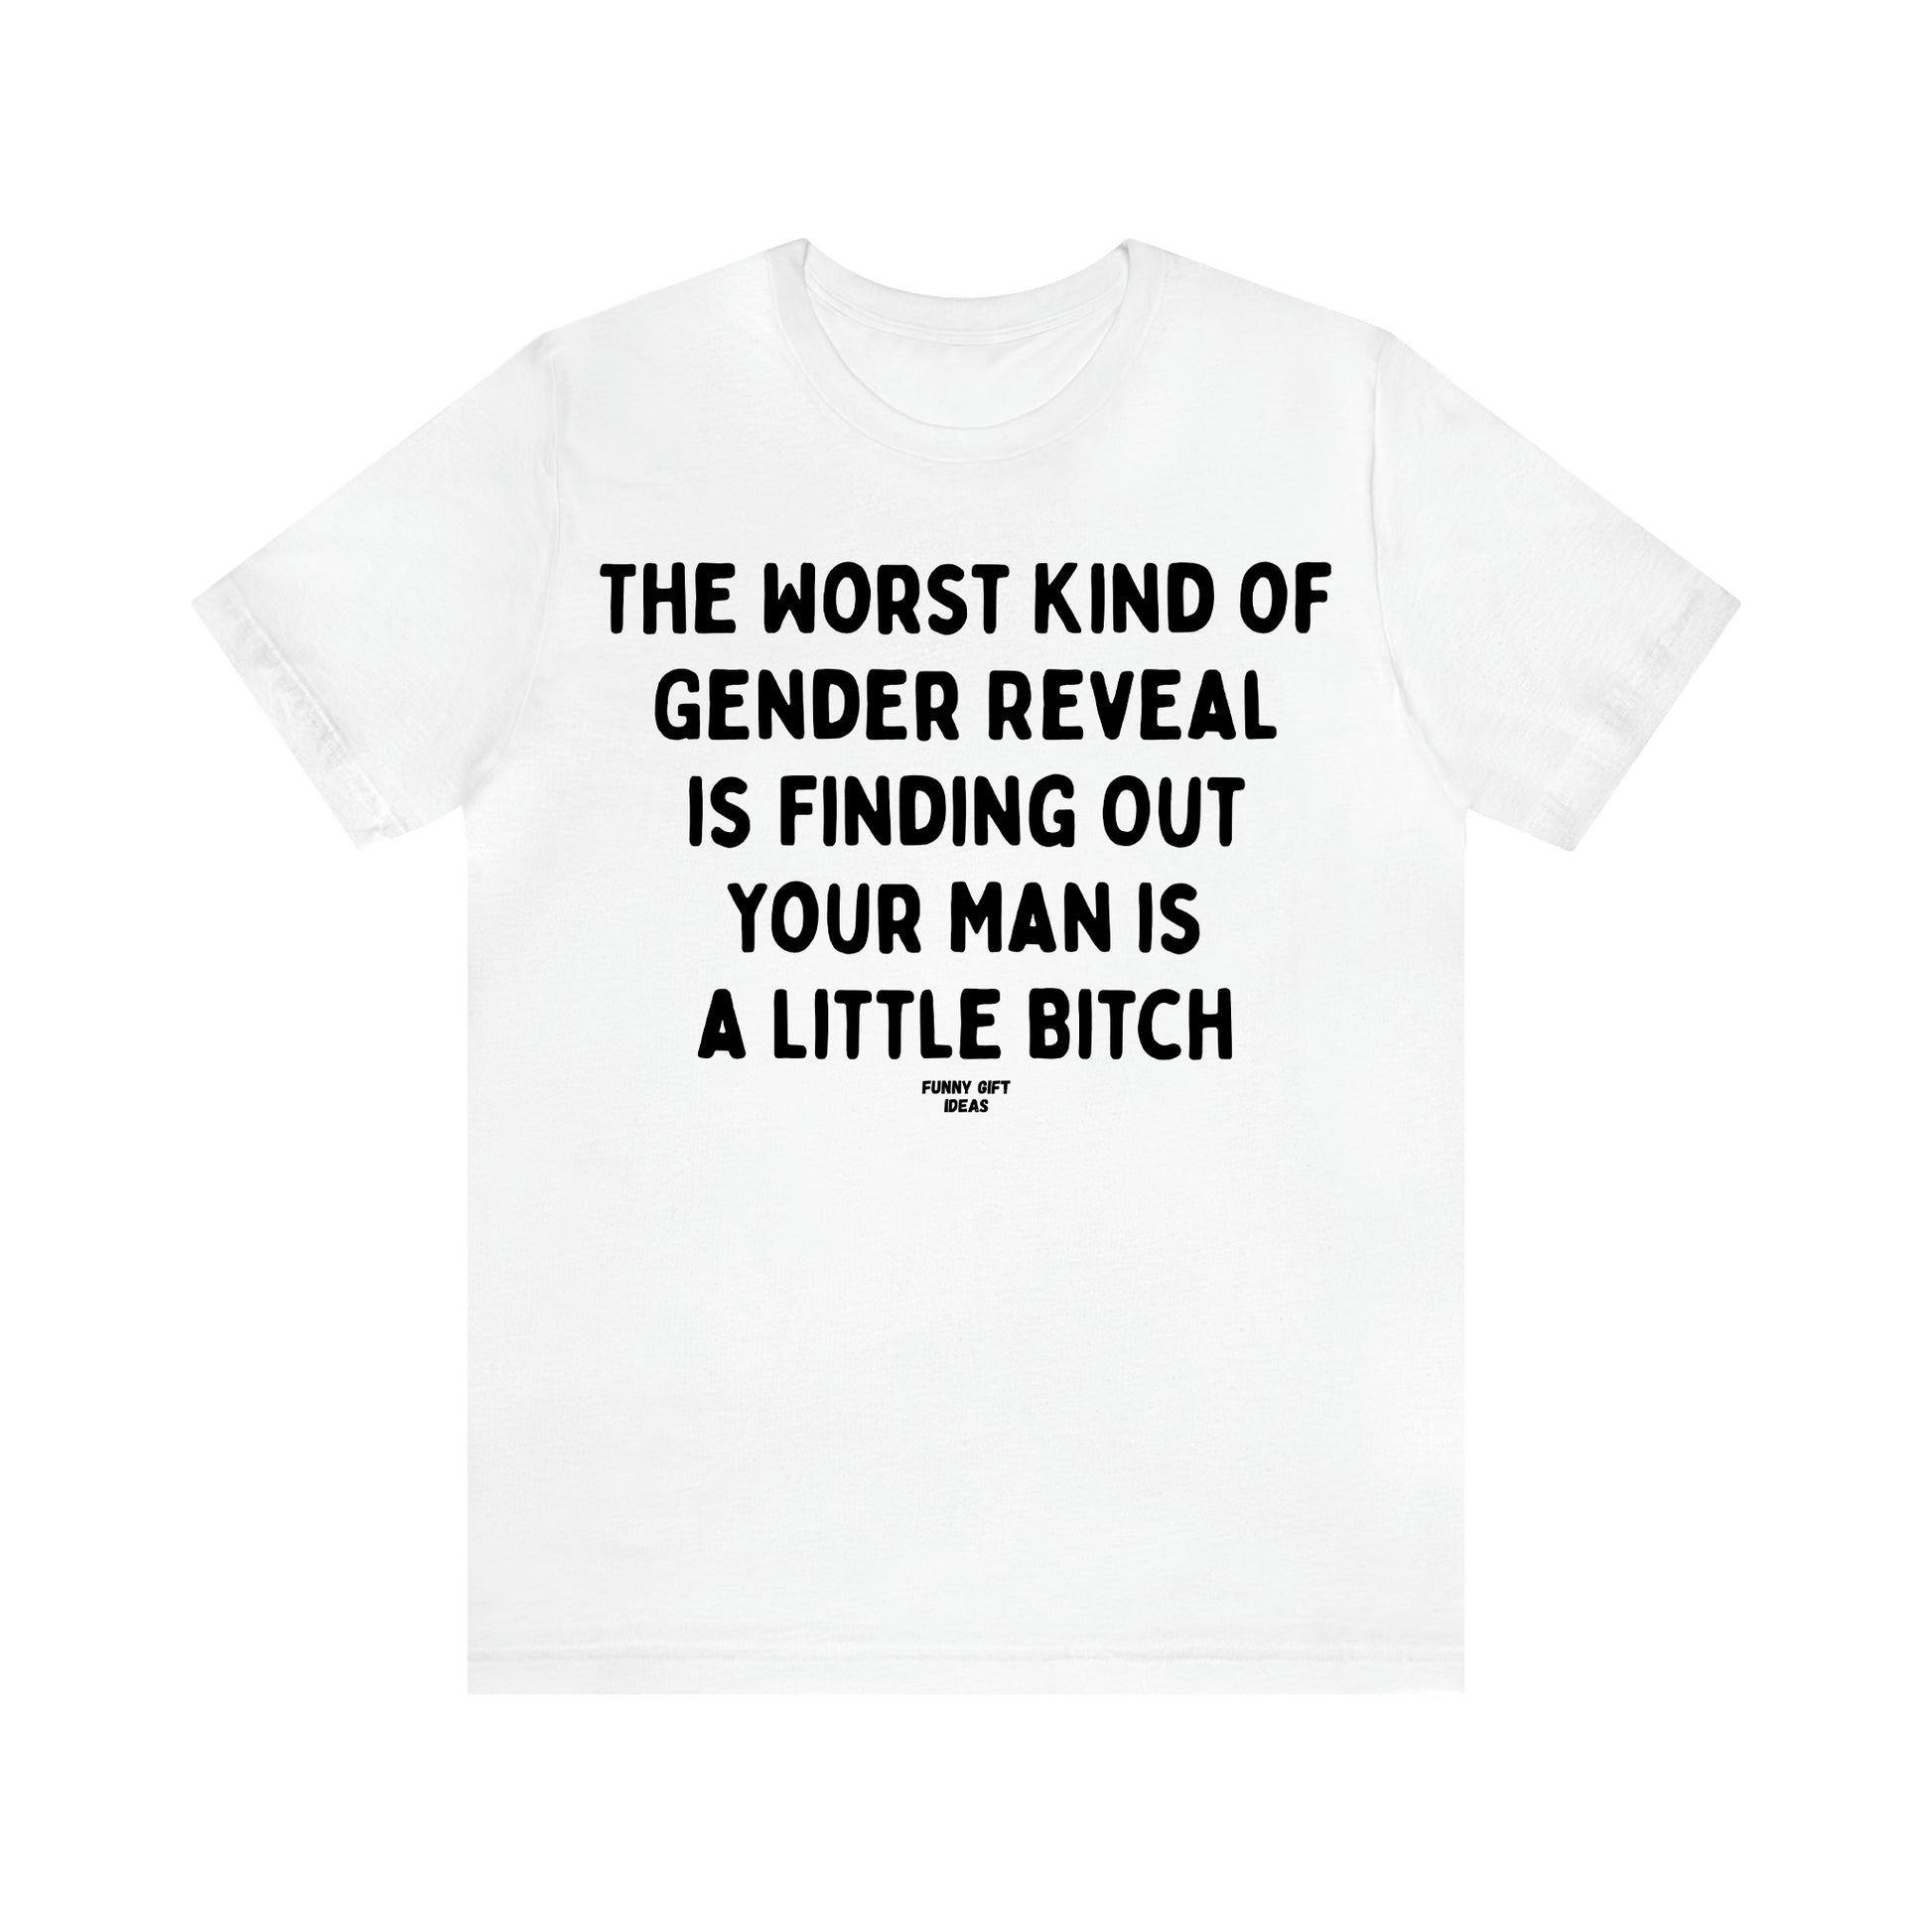 Women's T Shirts The Worst Kind of Gender Reveal is Finding Out Your Man is a Little Bitch - Funny Gift Ideas